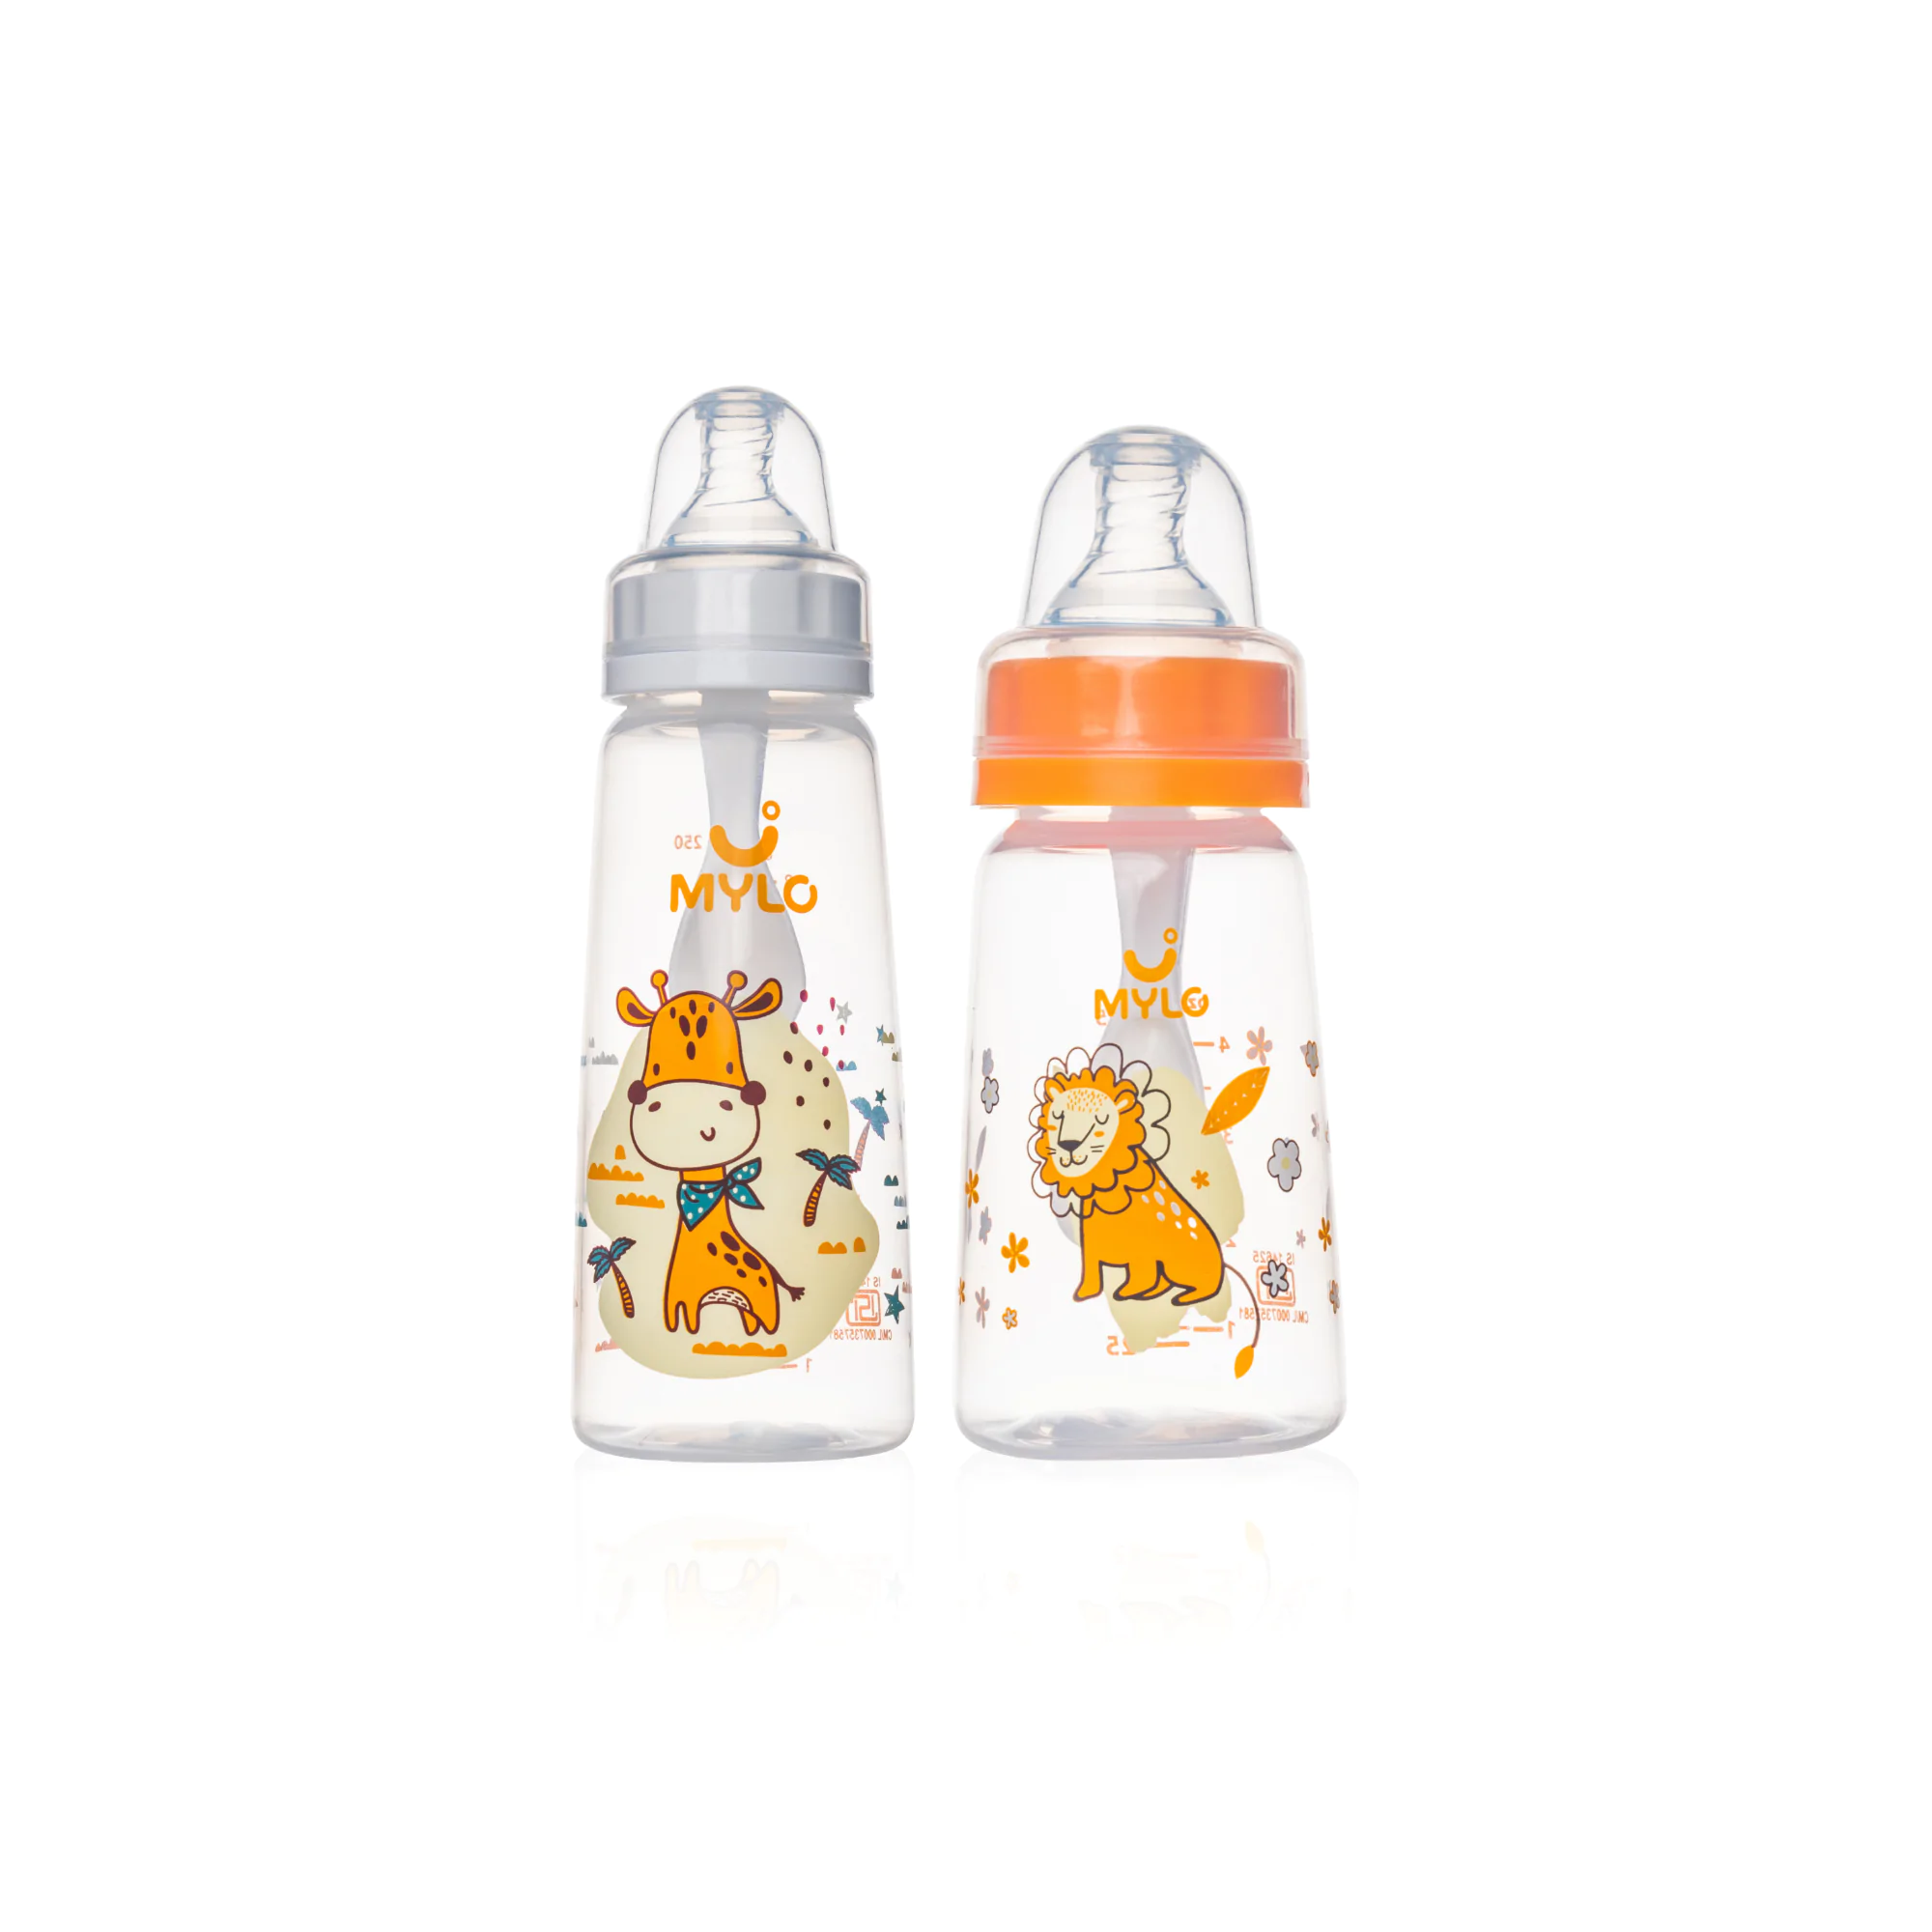 Mylo Feels Natural Baby Bottle – 125ml & 250 ml - BPA Free with Anti-Colic Nipple-Pack of 2- (Lion & Giraffe)